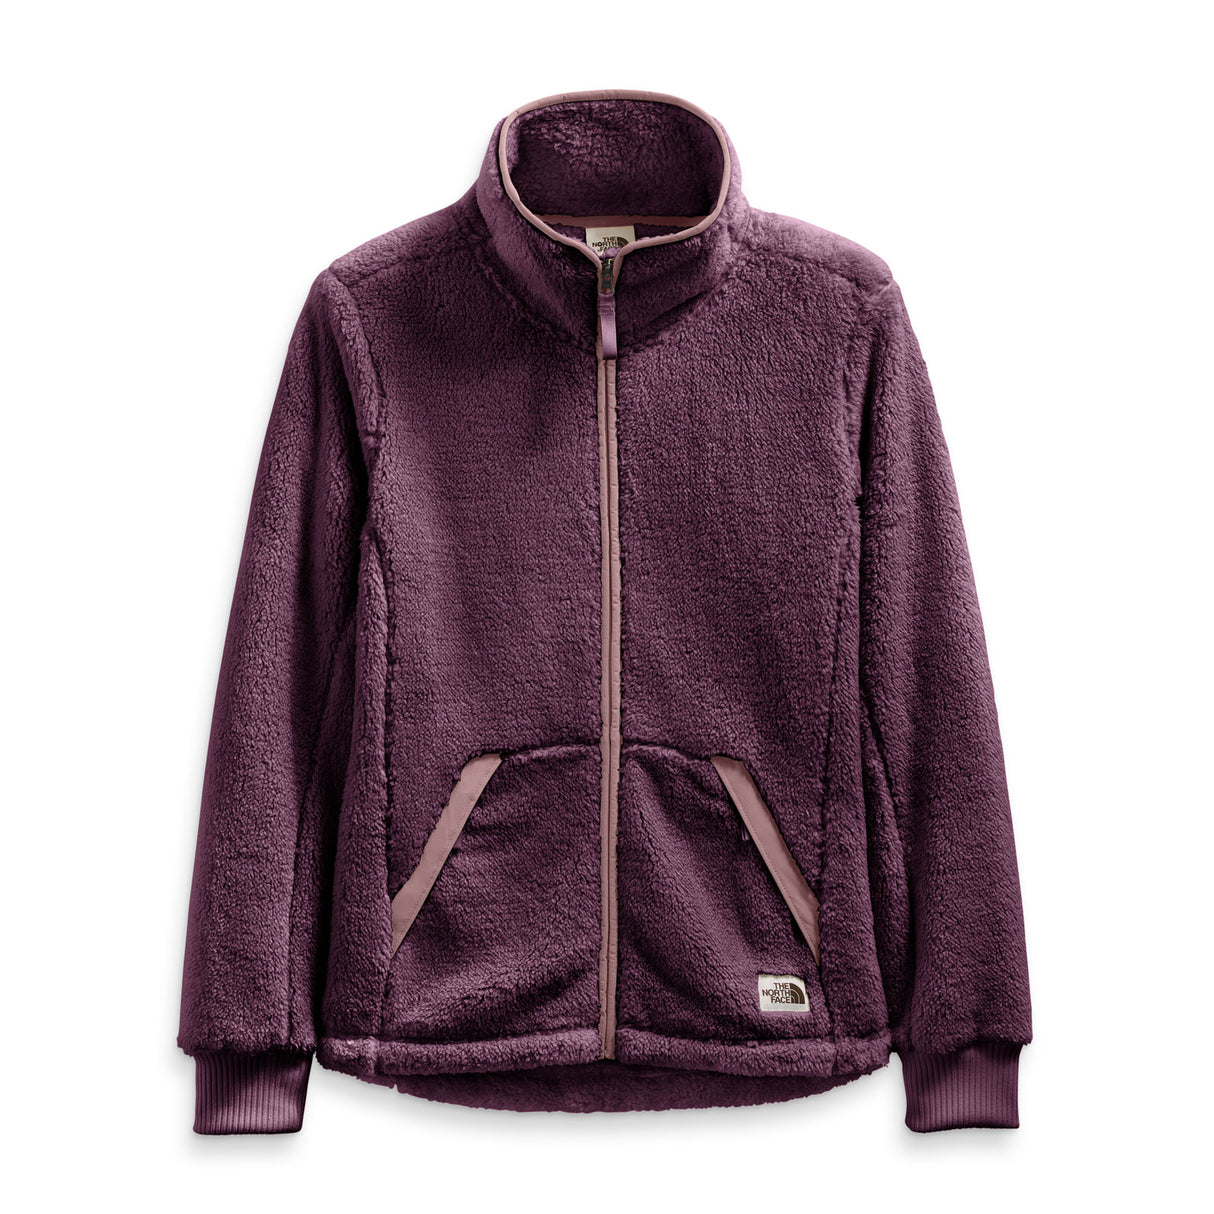 The North Face Campshire Full-Zip Fleece Jacket - Women's